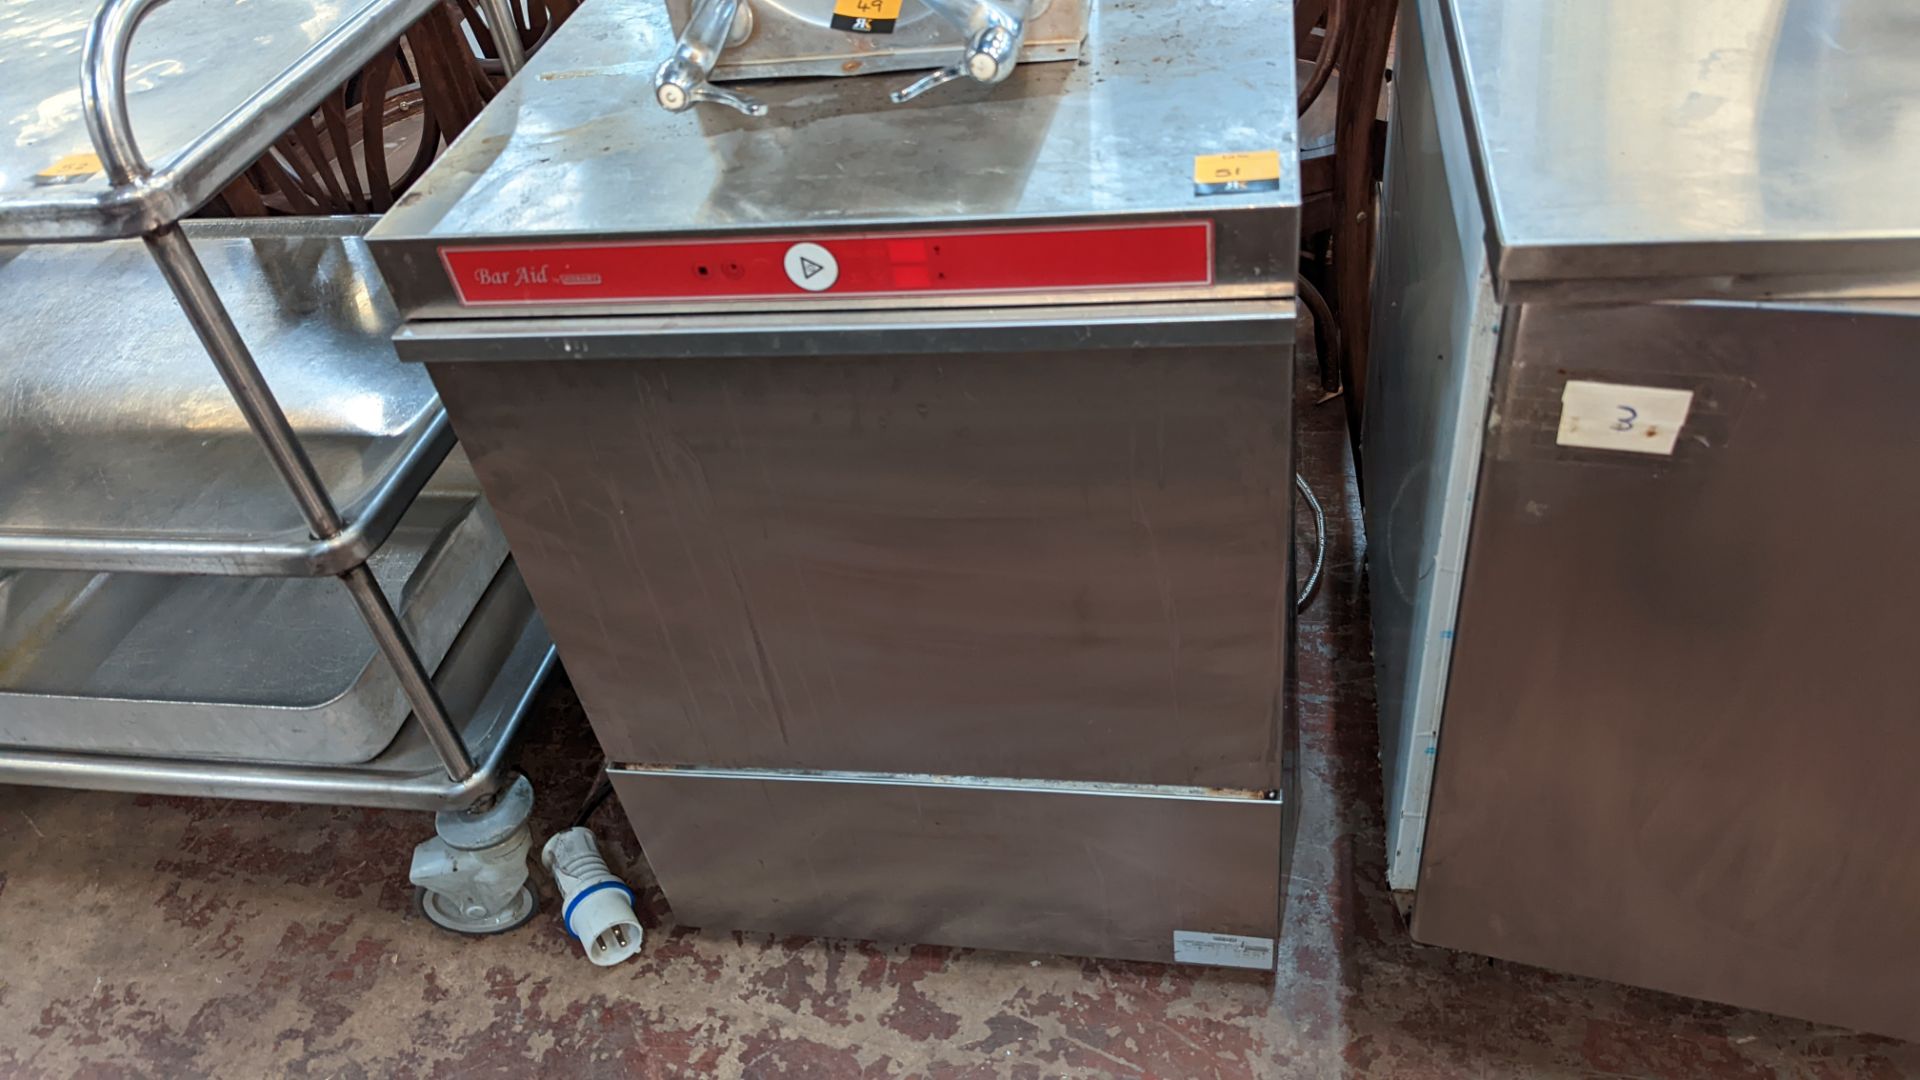 Hobart Bar Aid stainless steel glasswasher